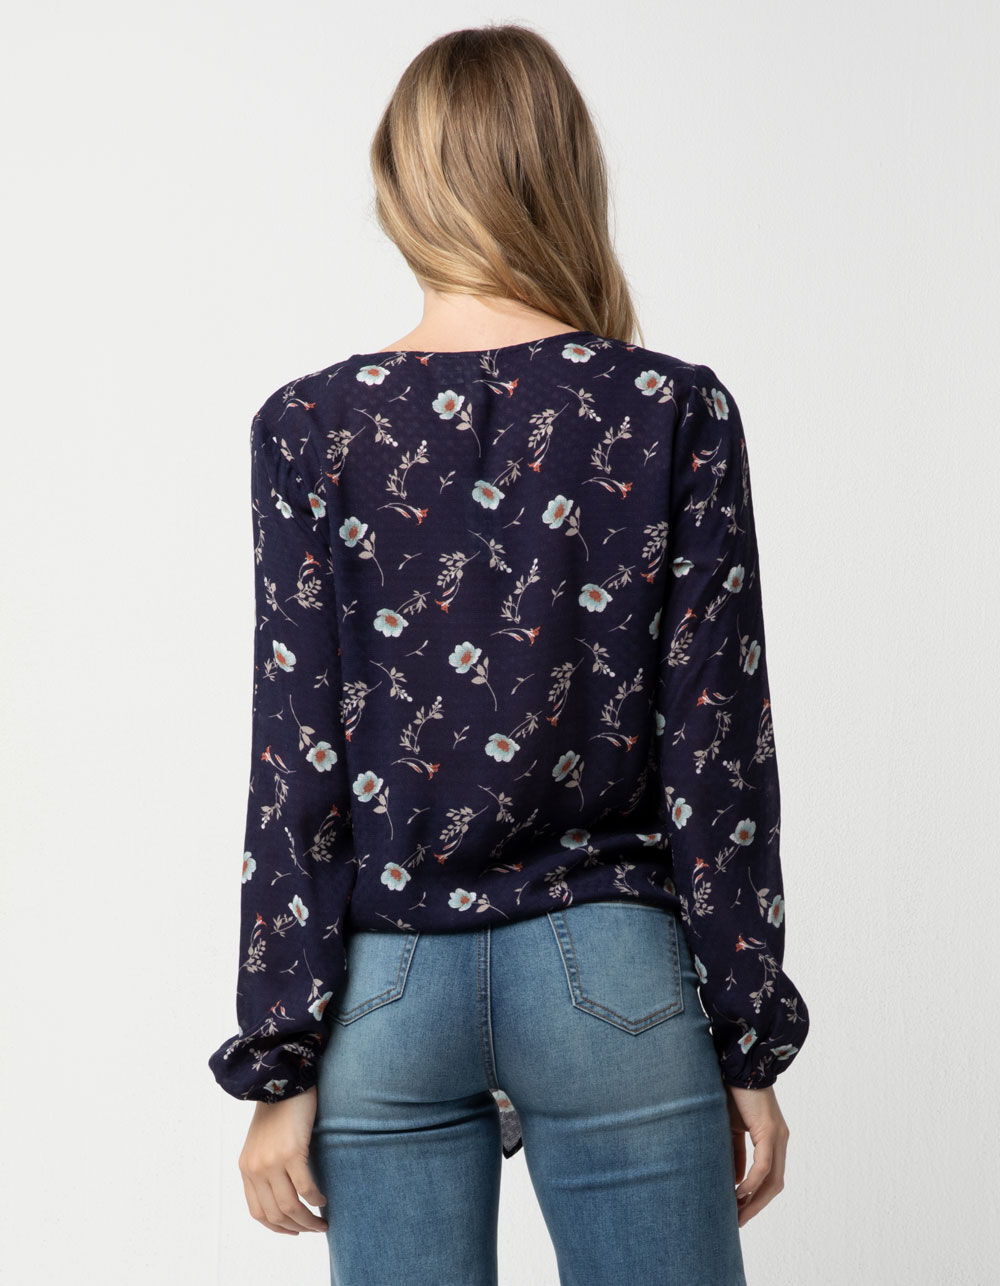 SKY AND SPARROW Button Front Floral Tie Front Womens Top - NAVY COMBO ...